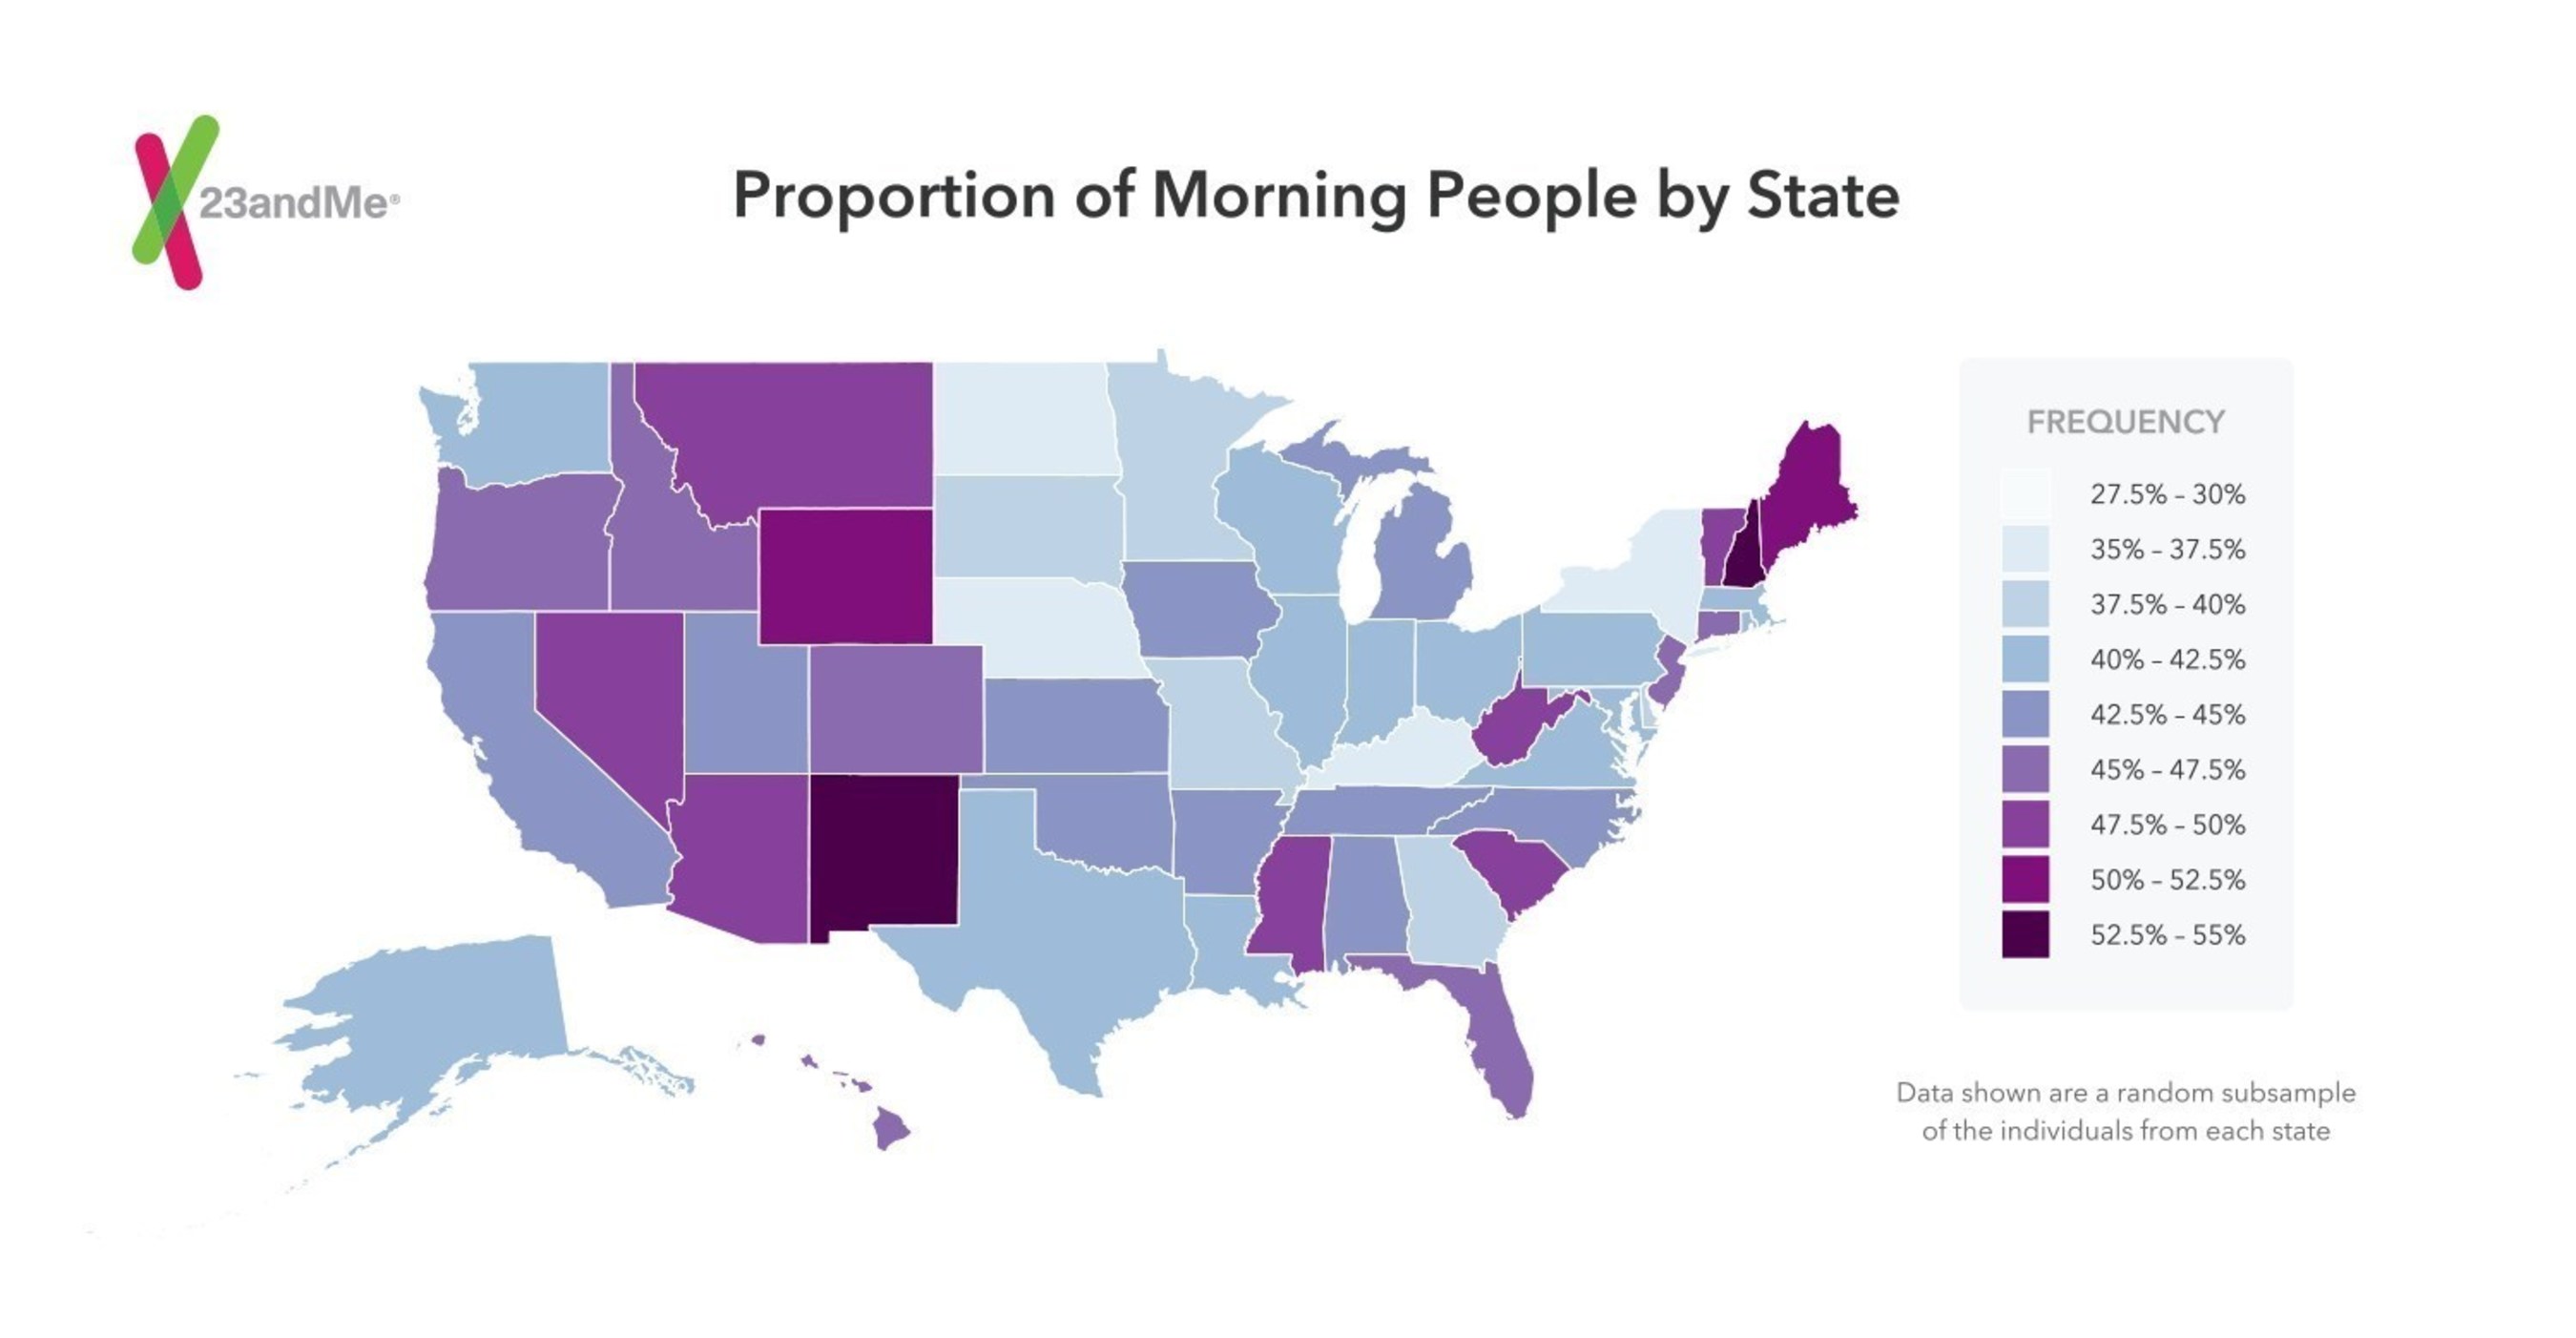 Proportion of morning people by state based on data from 23andMe (PRNewsFoto/23andMe, Inc.)